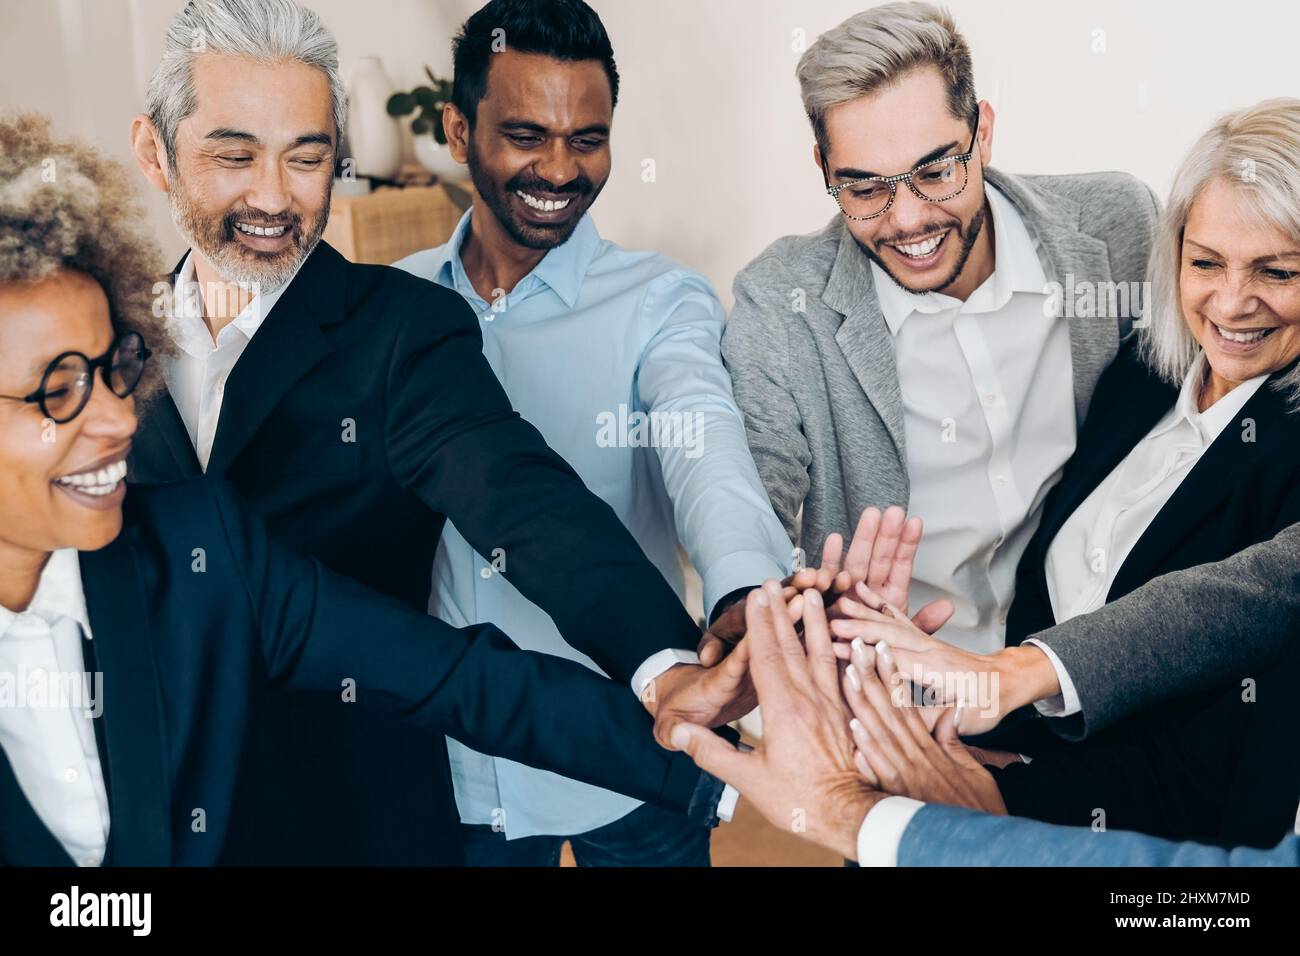 Multiracial business people celebrating together stacking hands inside modern office - Focus on asian man face Stock Photo